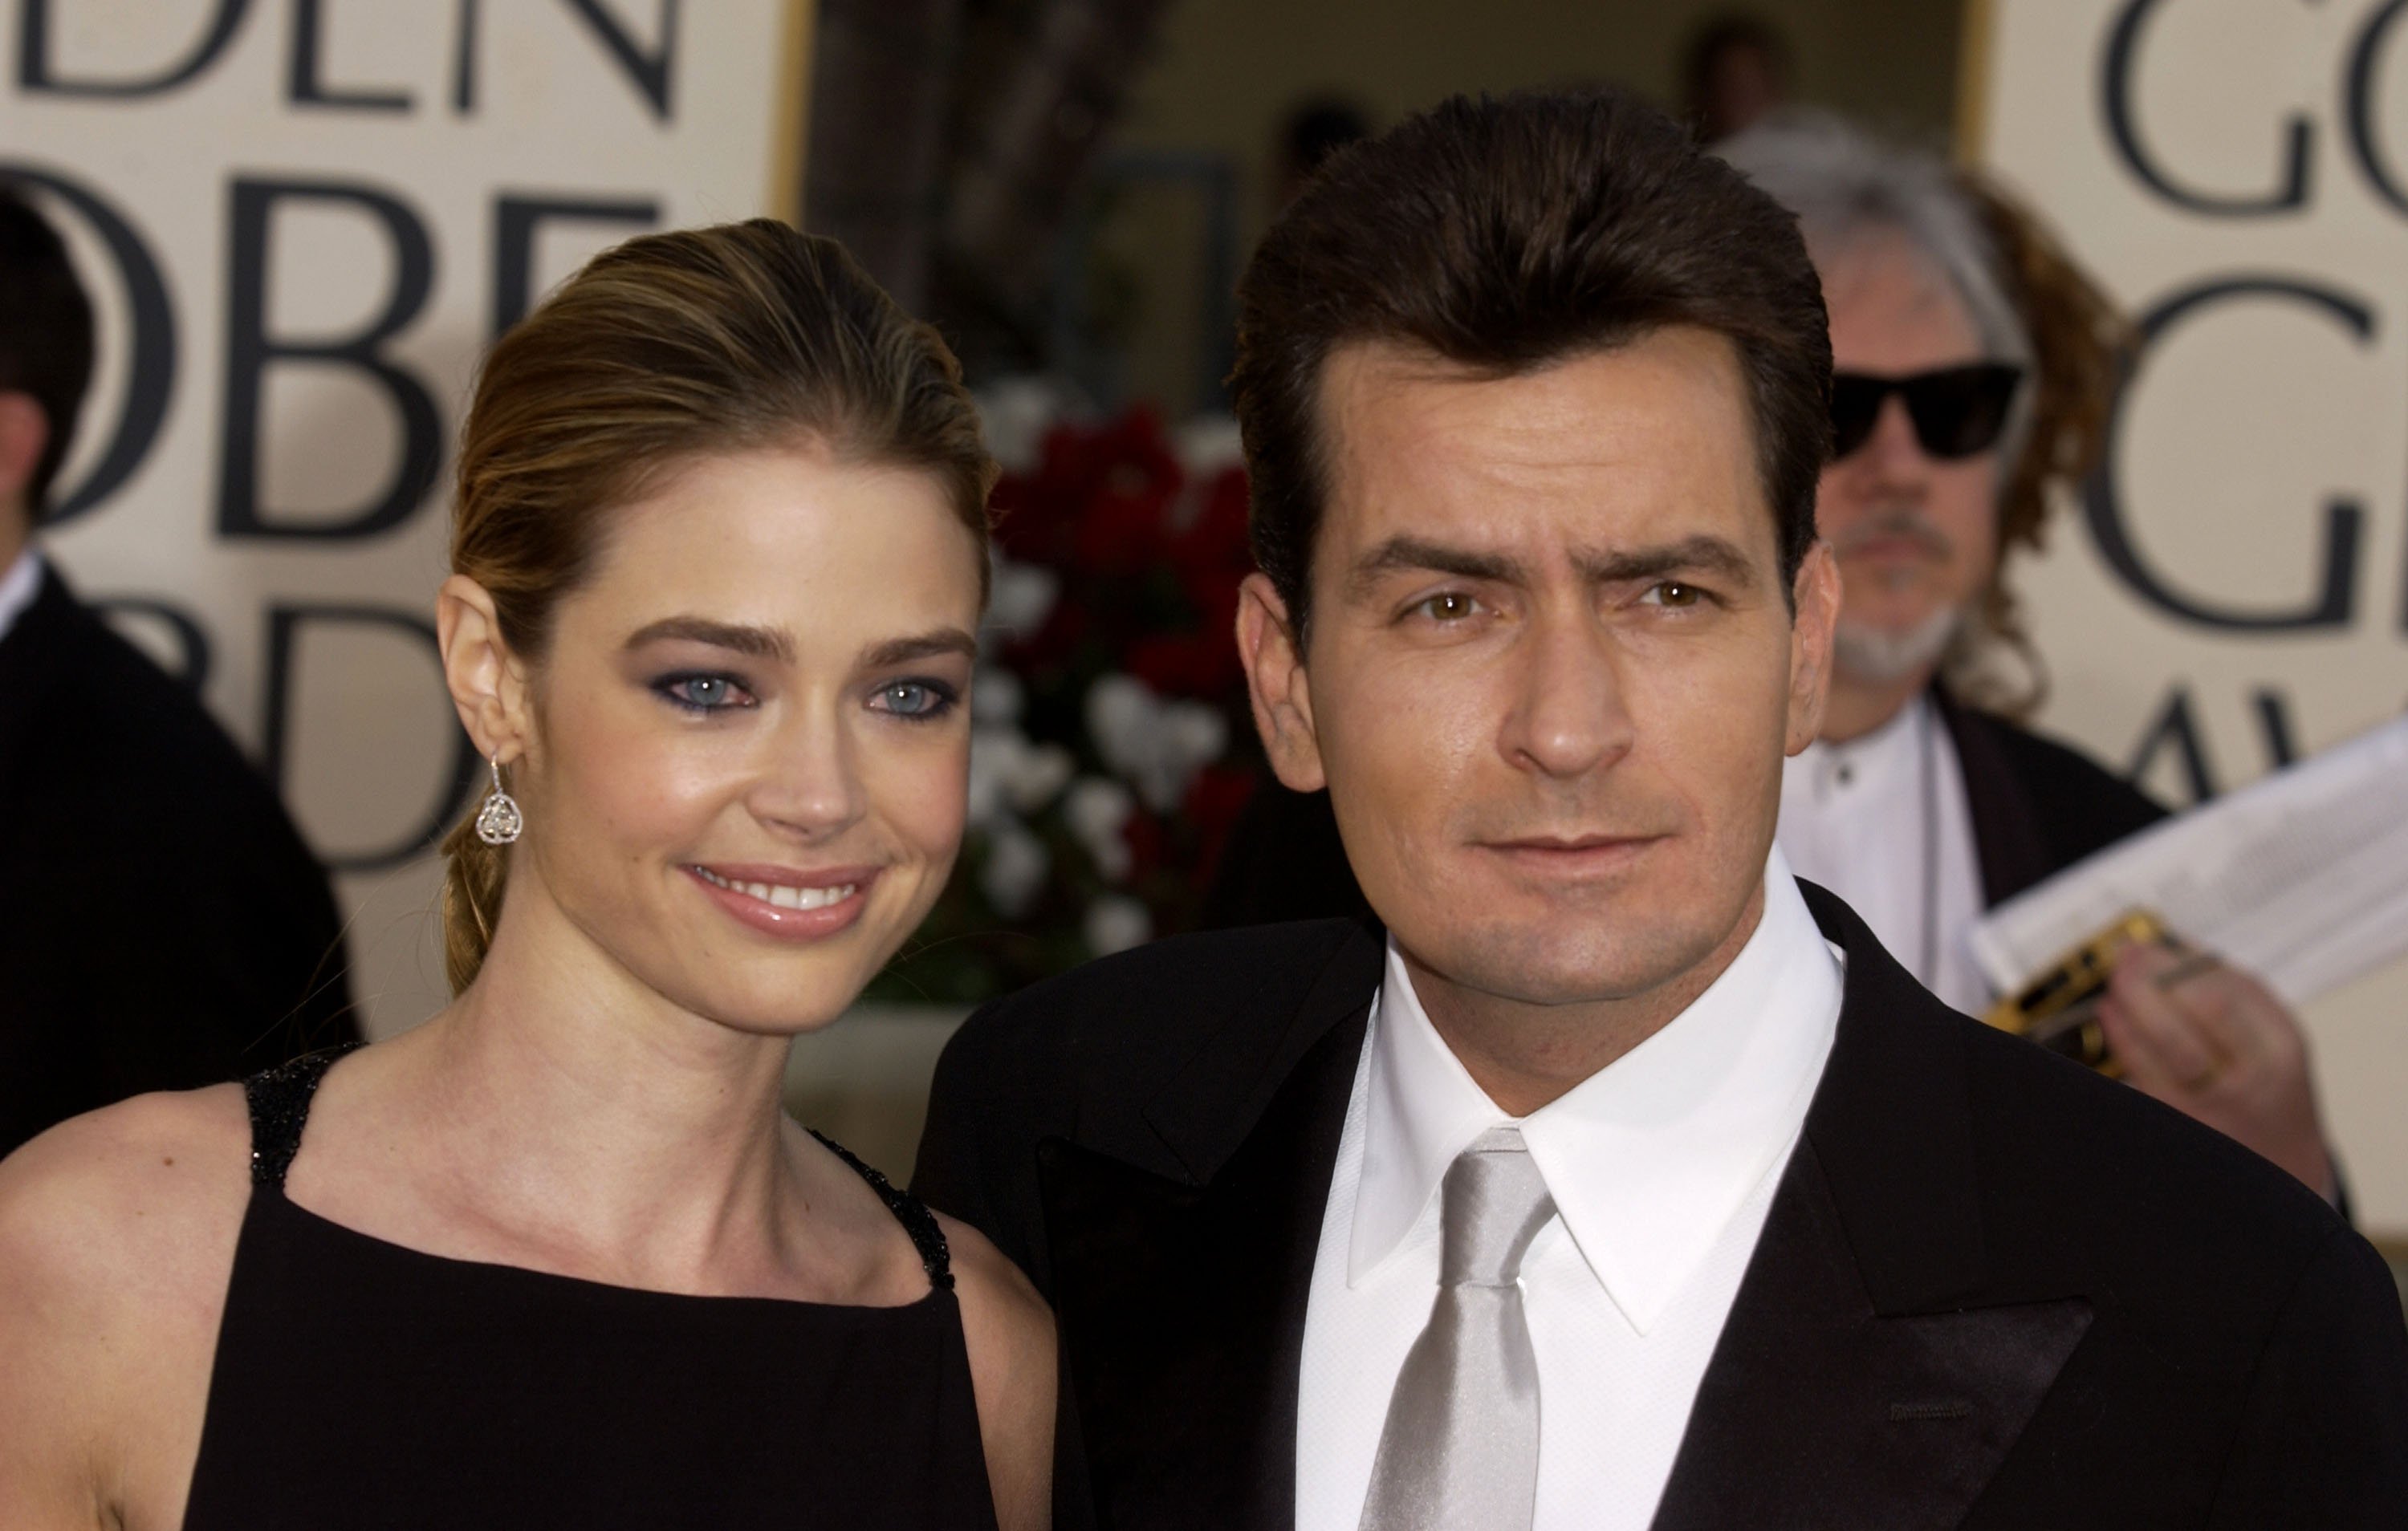 Denise Richards and Charlie Sheen arrive for the Golden Globe Awards at the Beverly Hilton Hotel in Beverly Hills, California